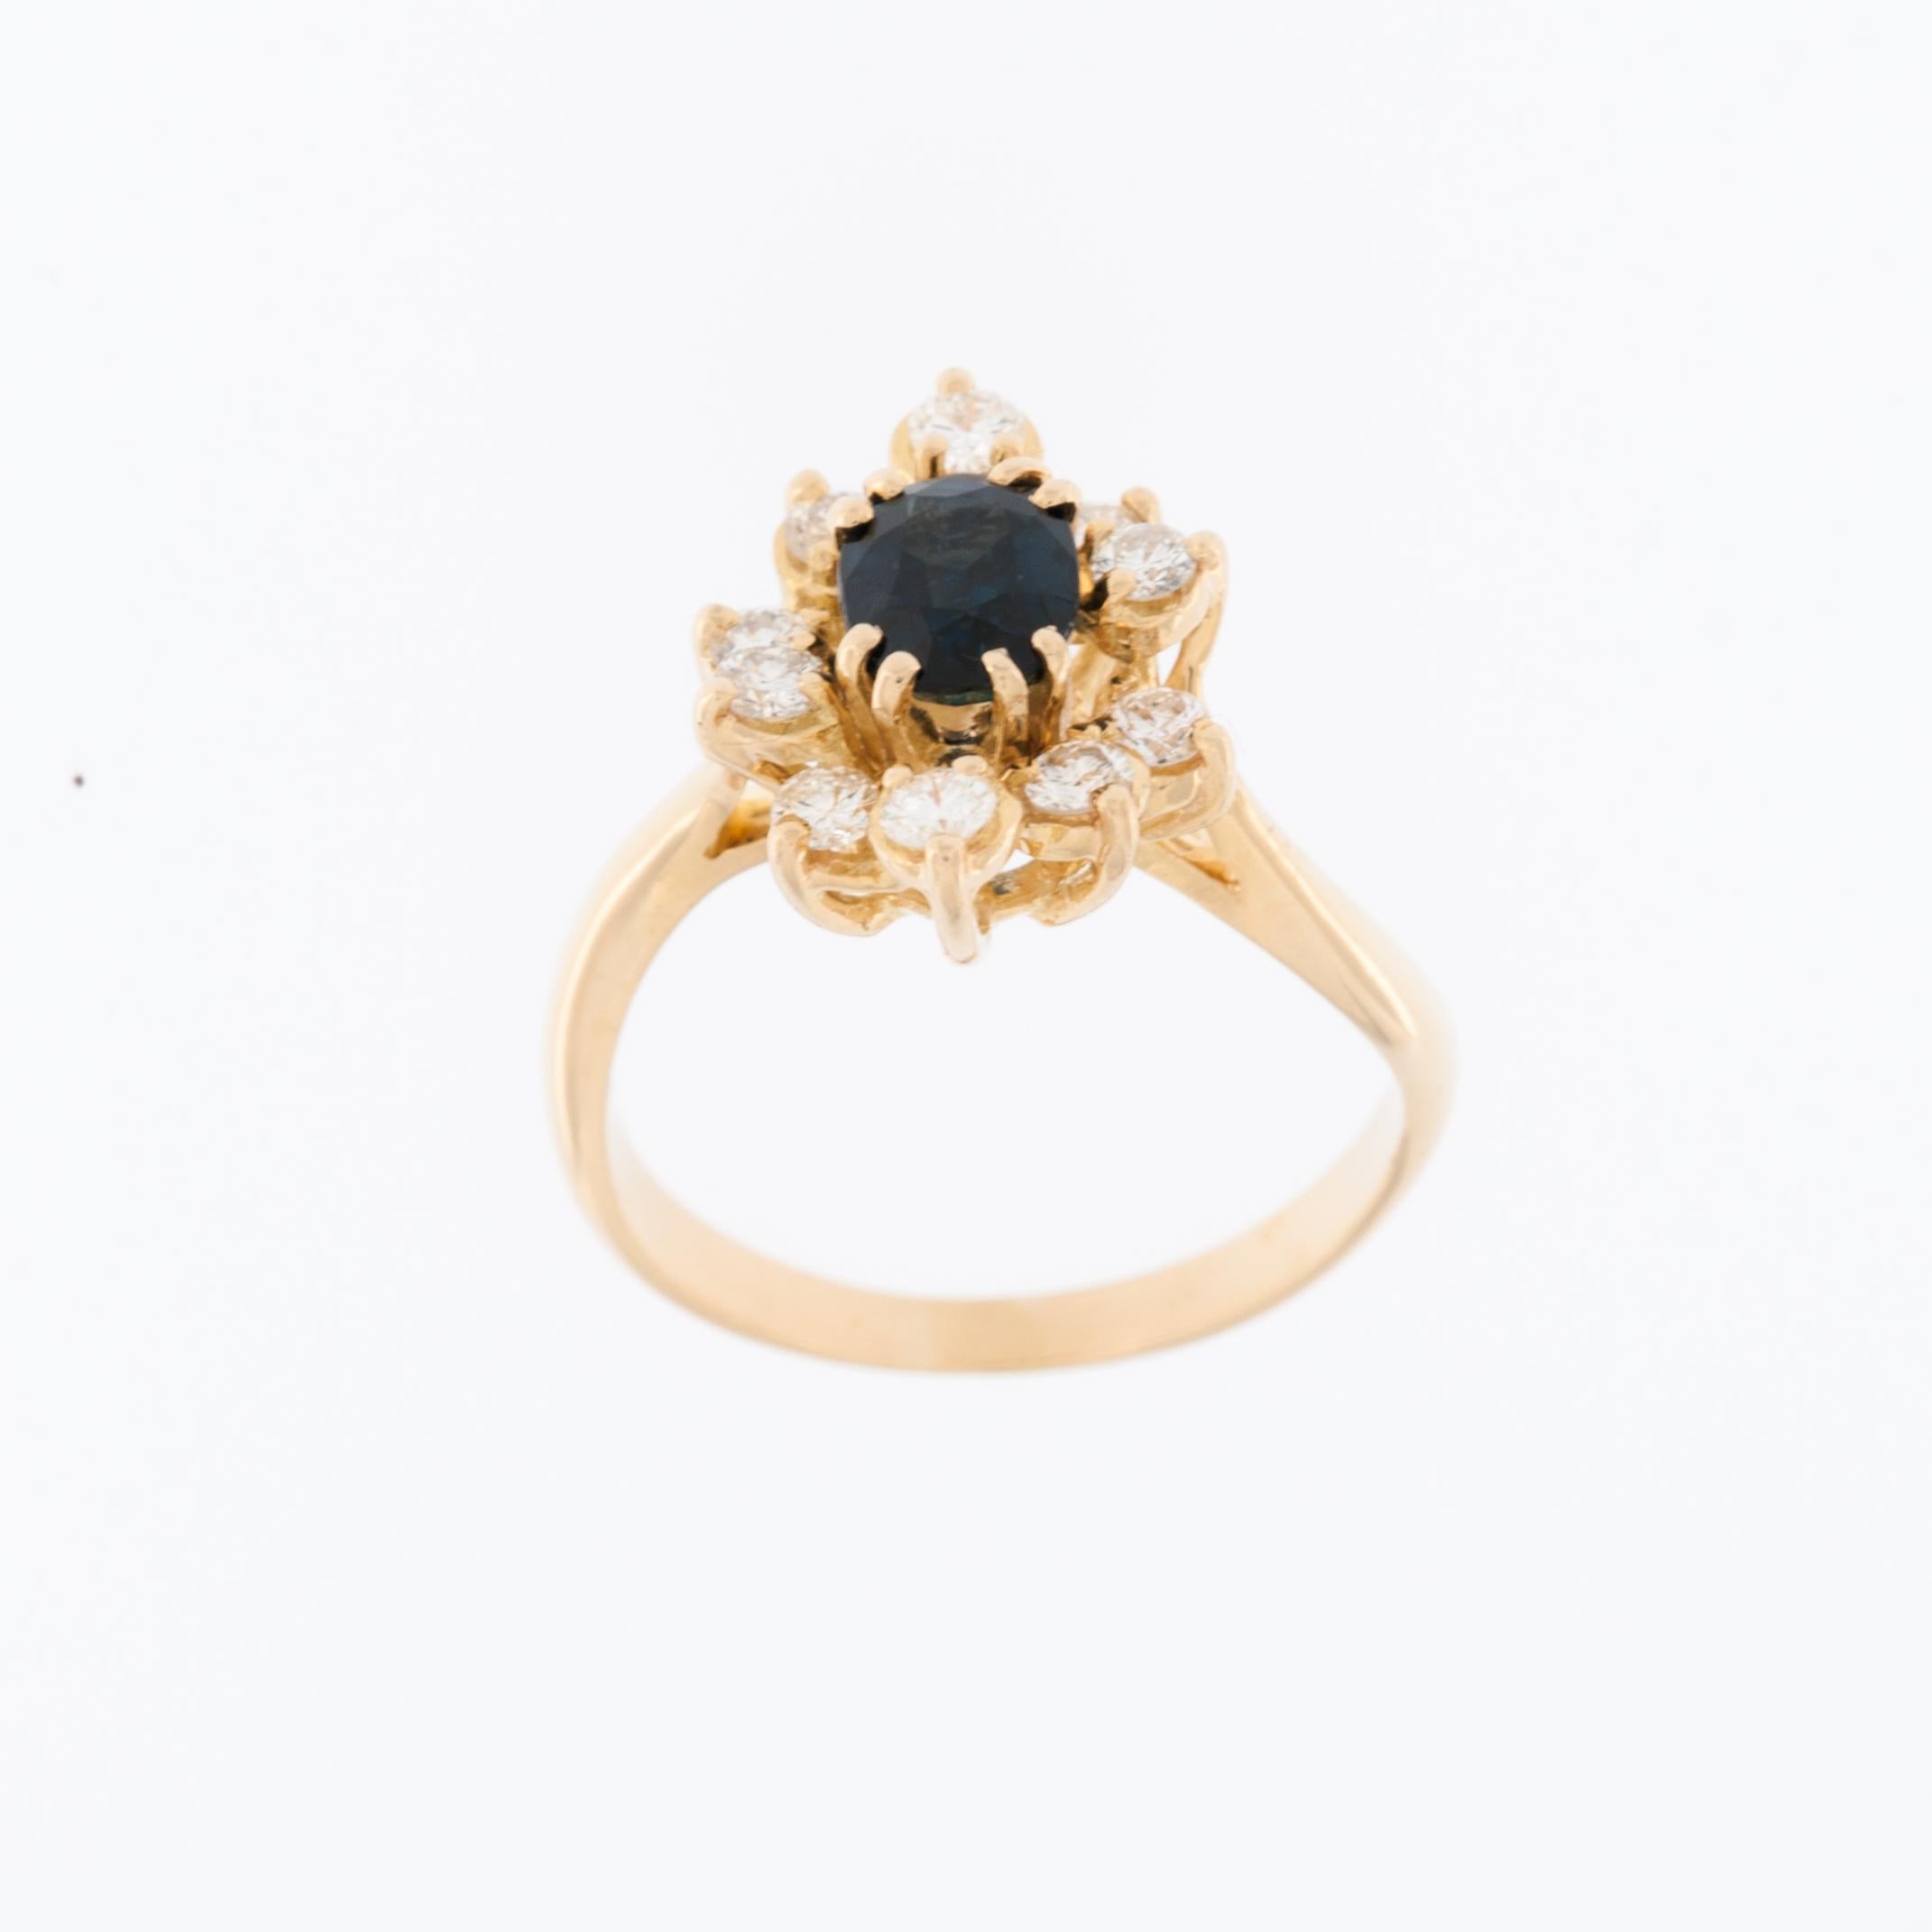 The French 18kt Yellow Gold Ring with Diamonds and Sapphire is an exquisite piece of jewelry that combines luxury and sophistication. Crafted in France, the ring is made from high-quality 18-karat yellow gold, ensuring both durability and a rich,